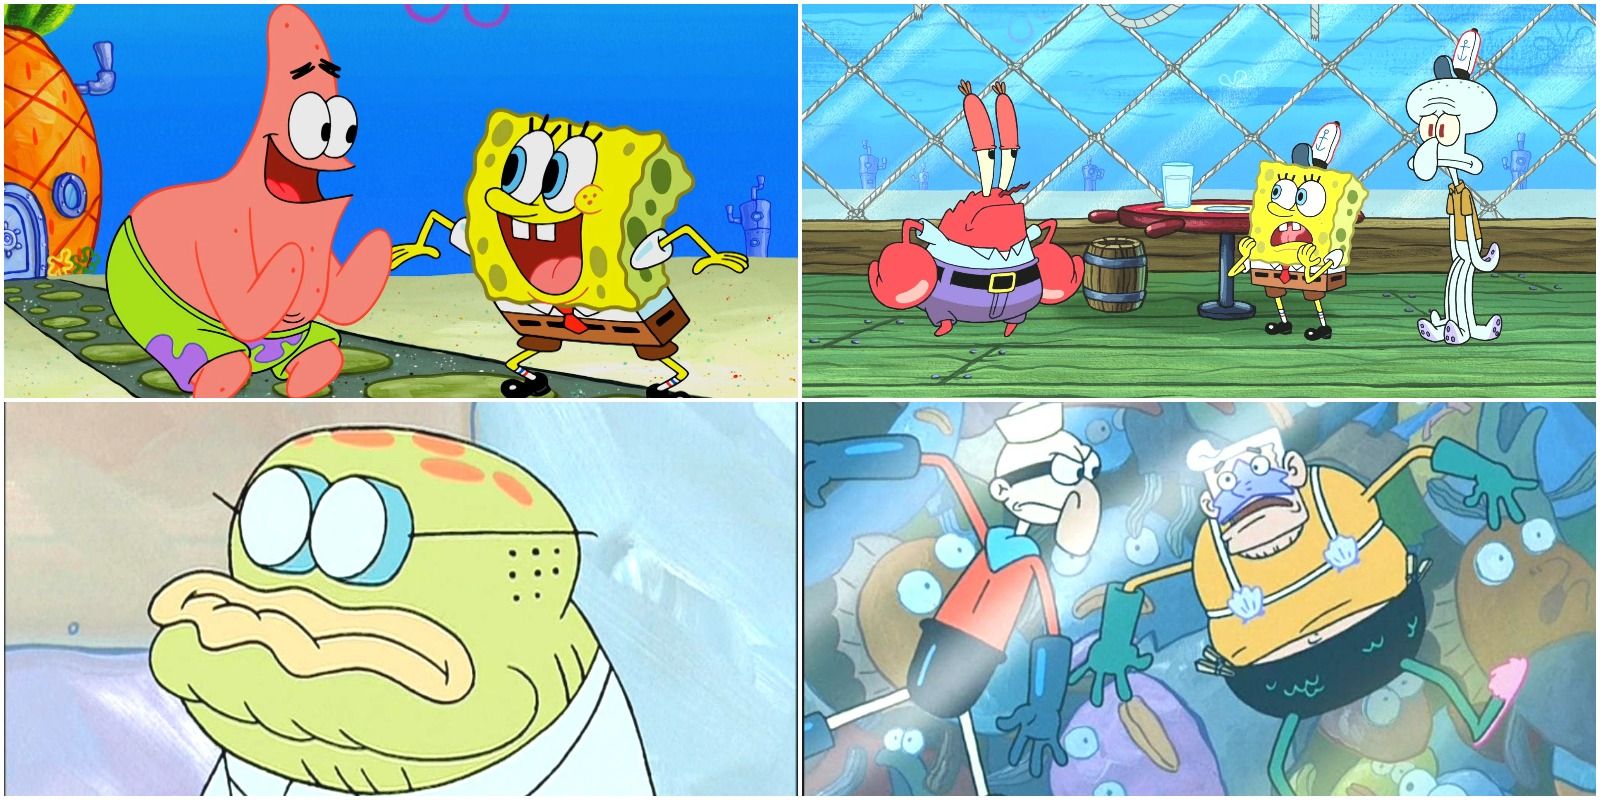 SpongeBob, Patrick, Mermaid Man, Squidward, and Old Man Jenkins from the TV show